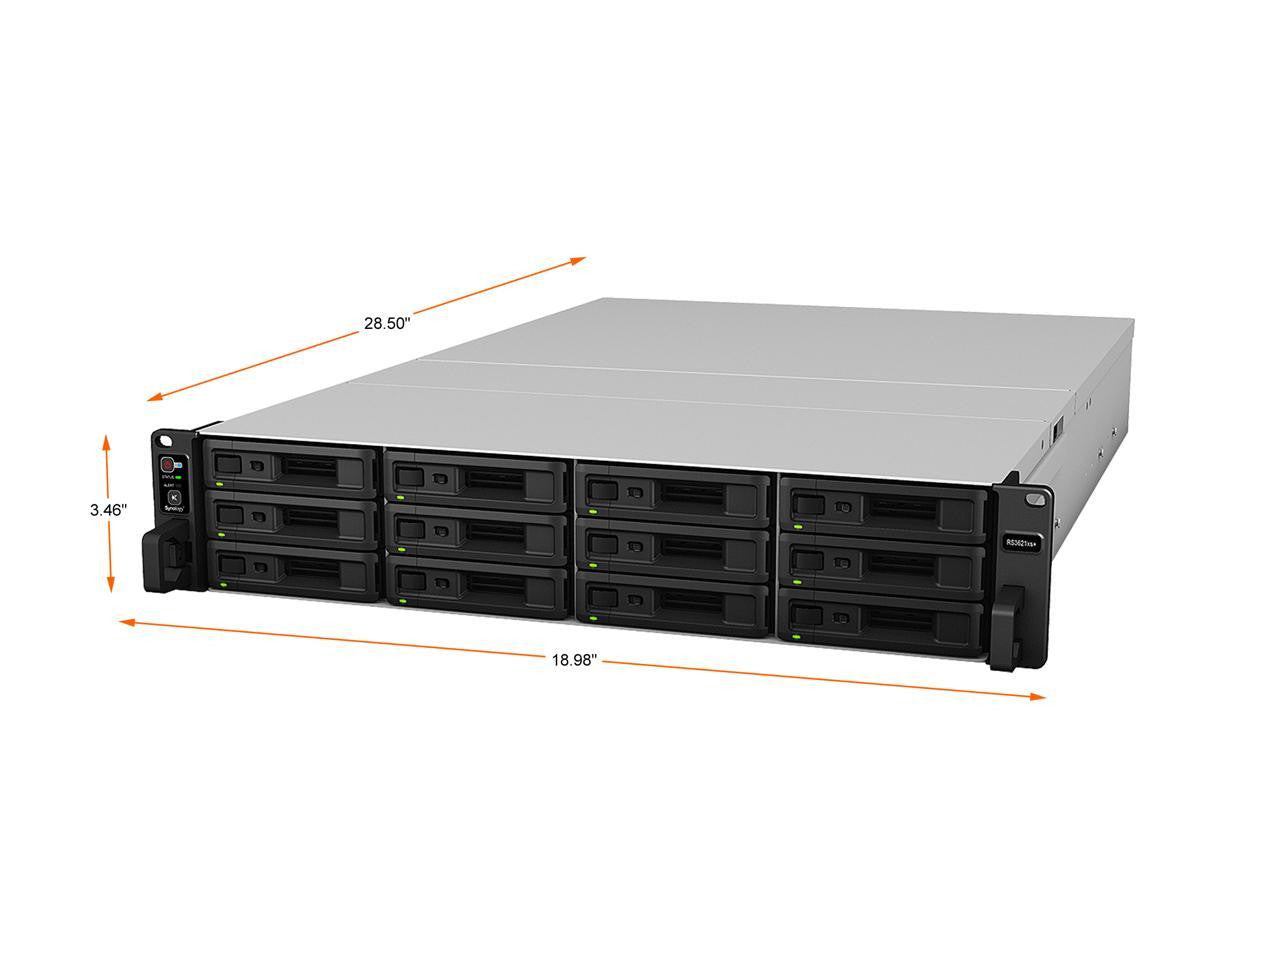 RS3621xs+ 12-BAY RackStation with 64GB RAM and 11.52TB (12 x 960GB) of Synology Enterprise Solid State Drives